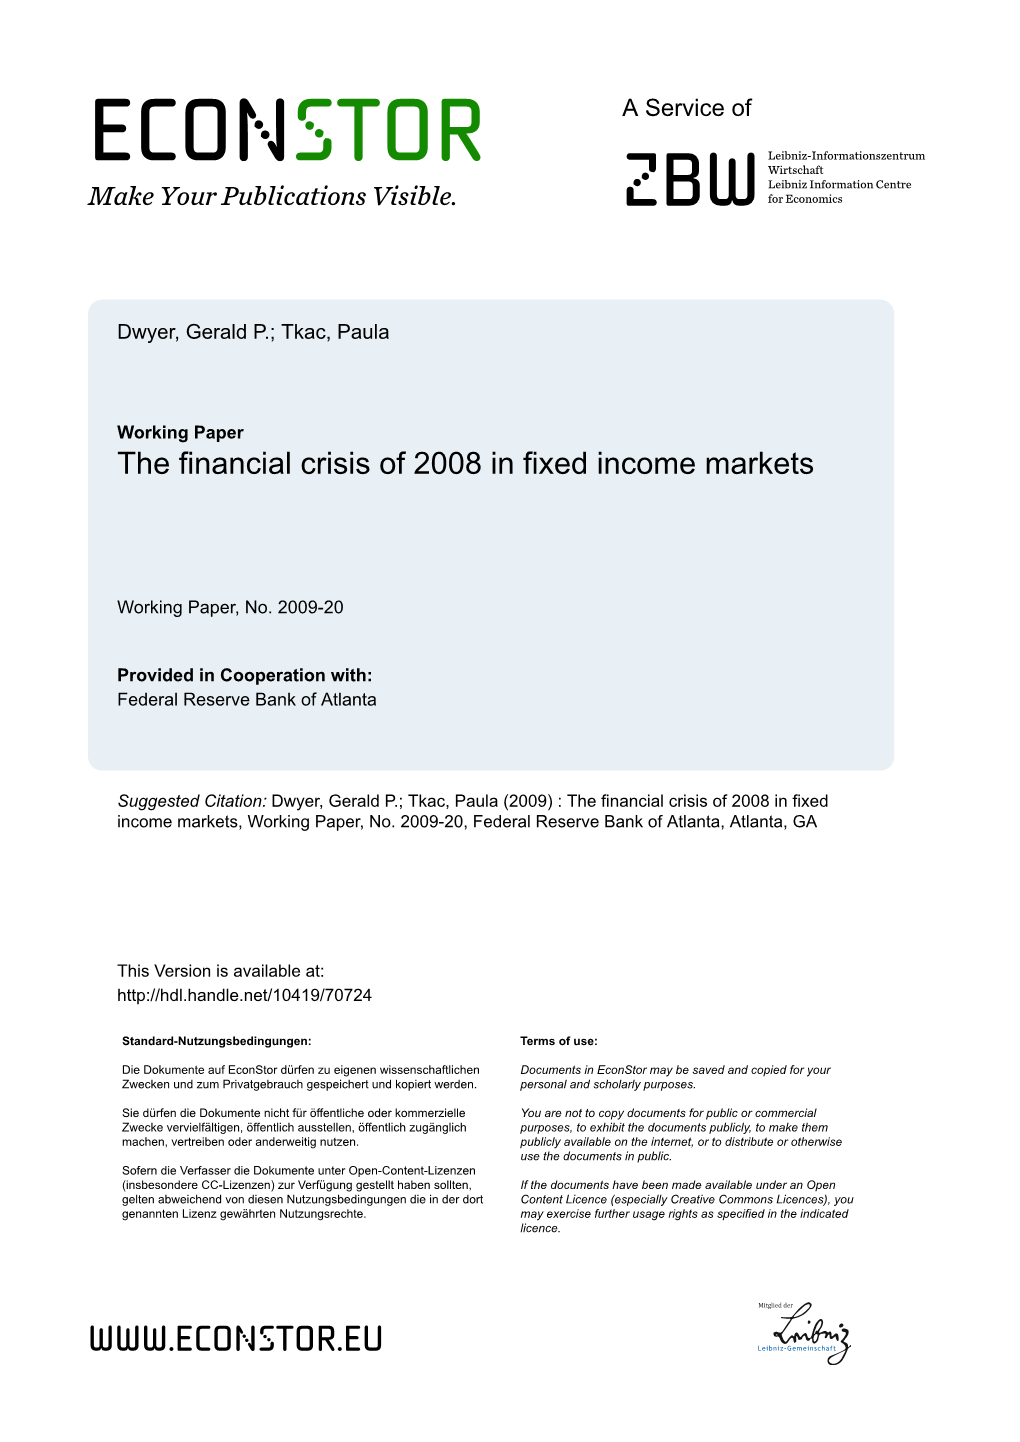 The Financial Crisis of 2008 in Fixed Income Markets